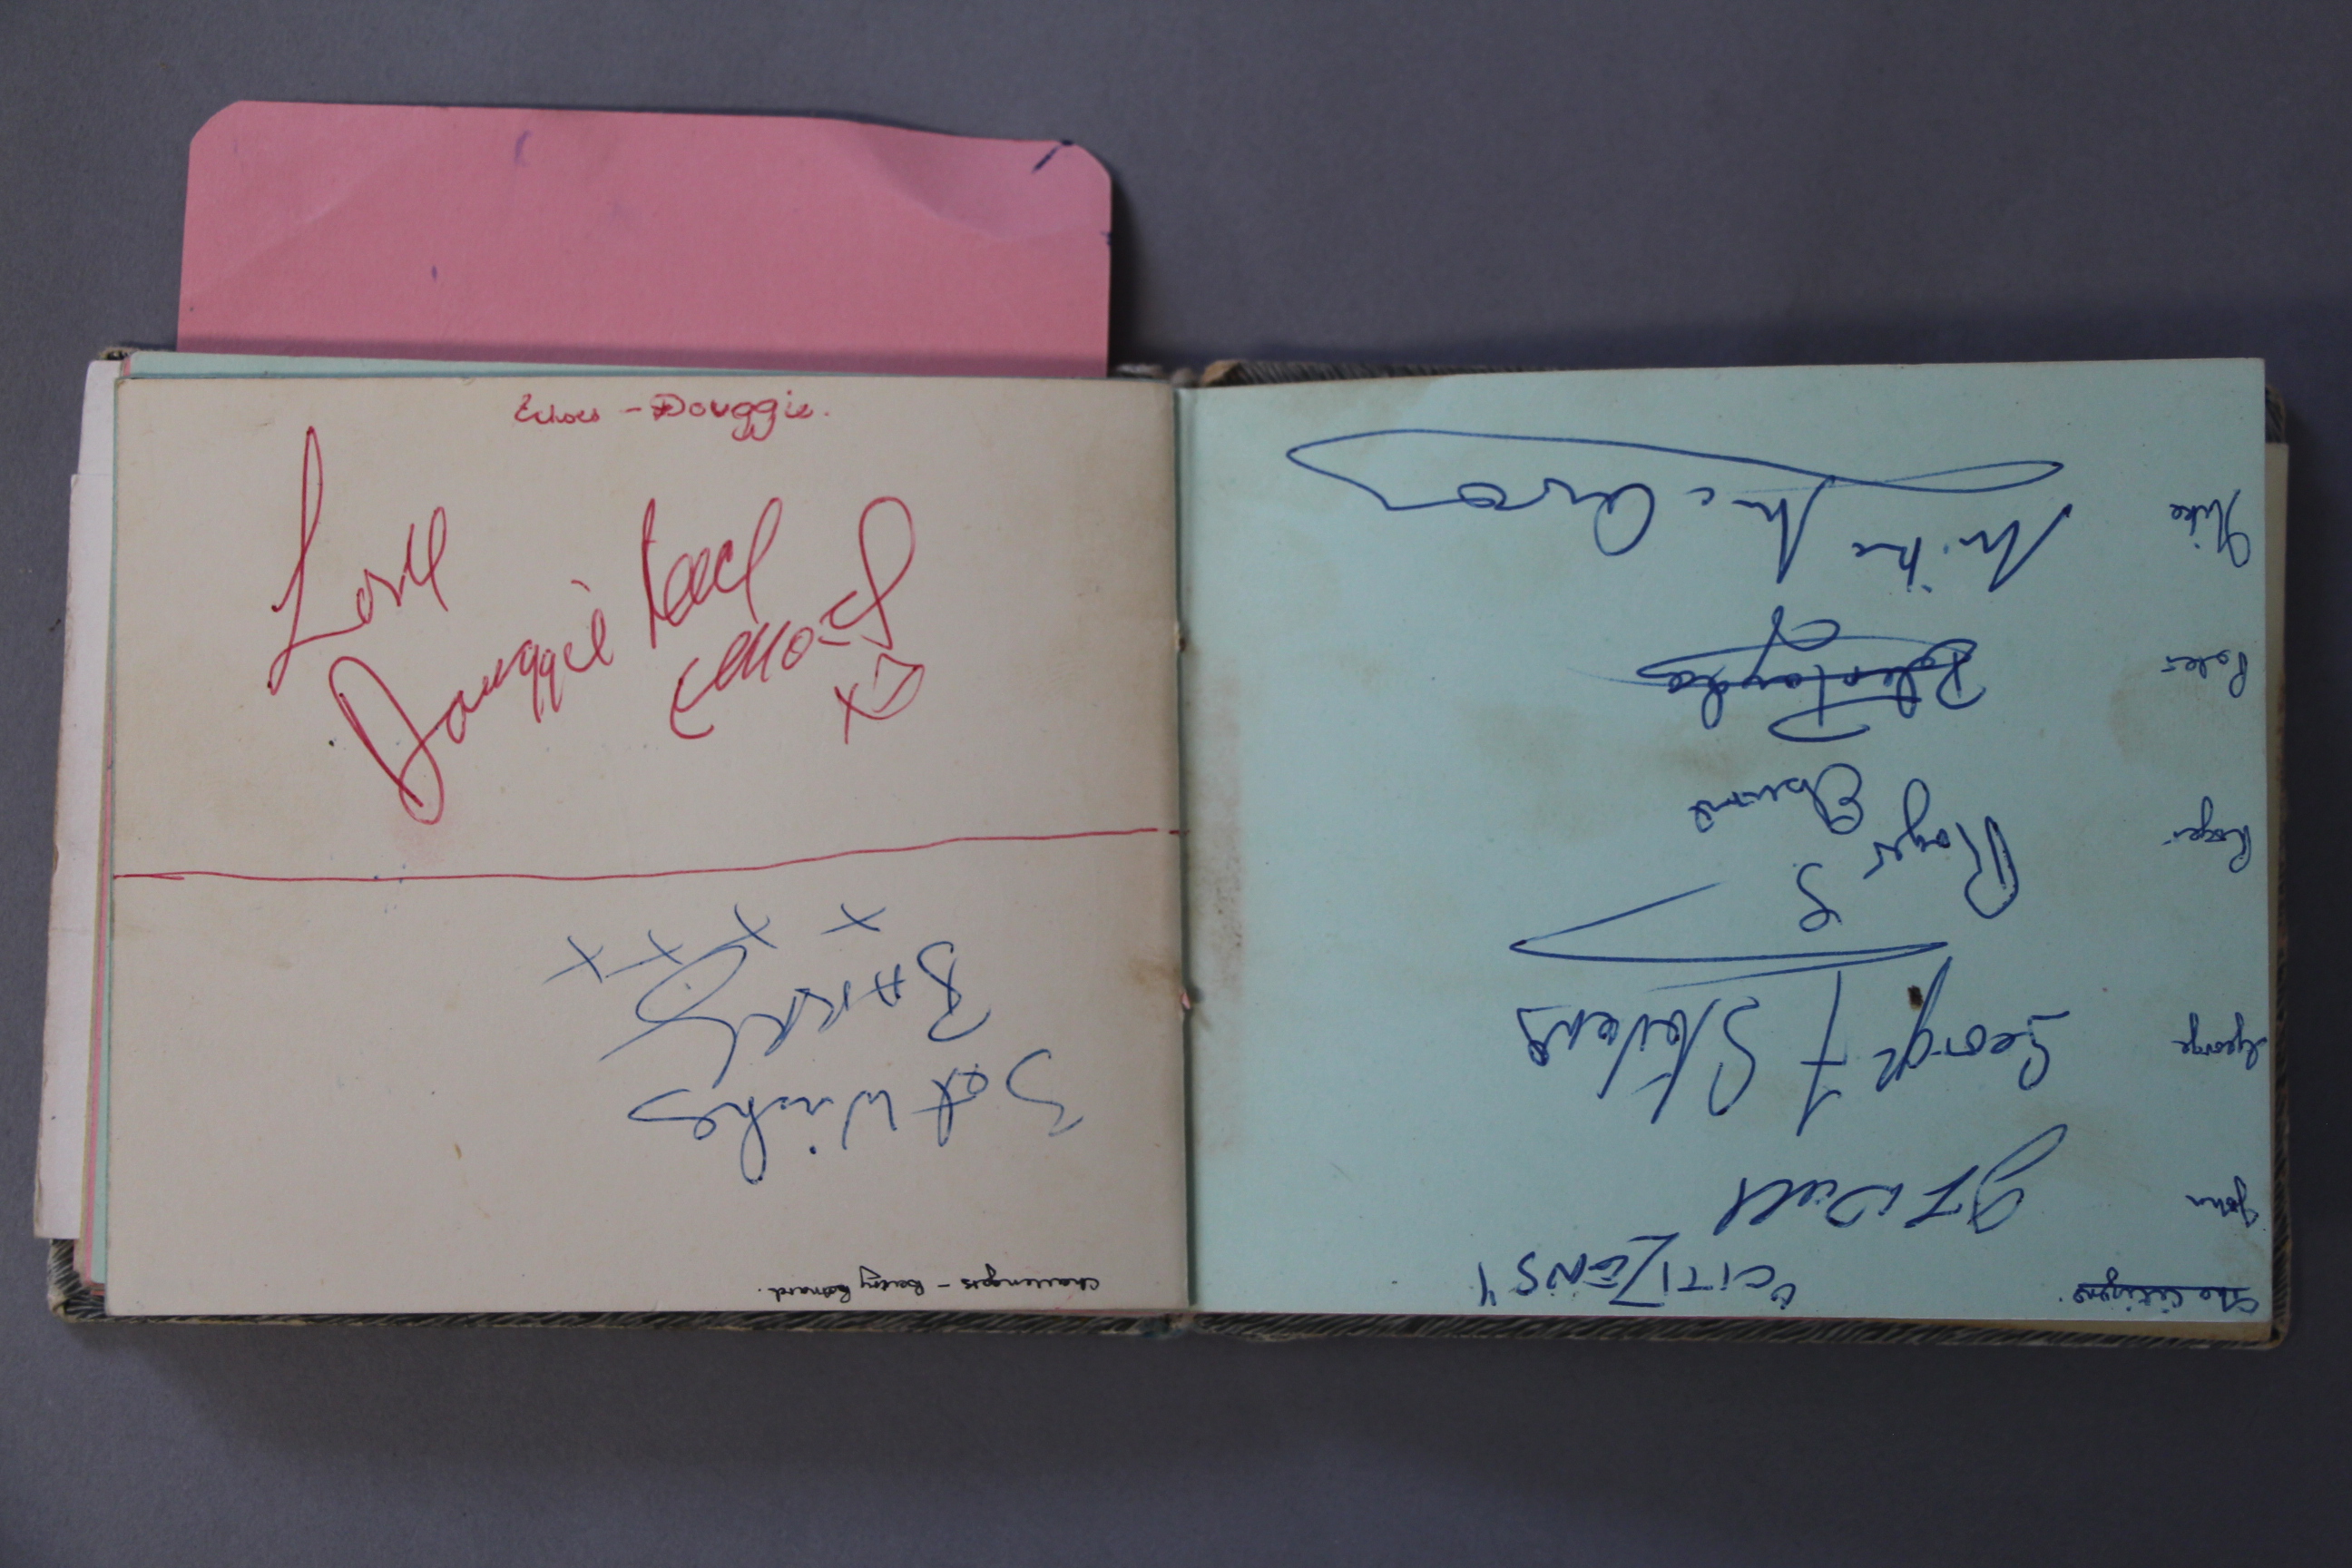 An autograph book with signatures and many car registrations of the groups collected personally by - Image 20 of 22